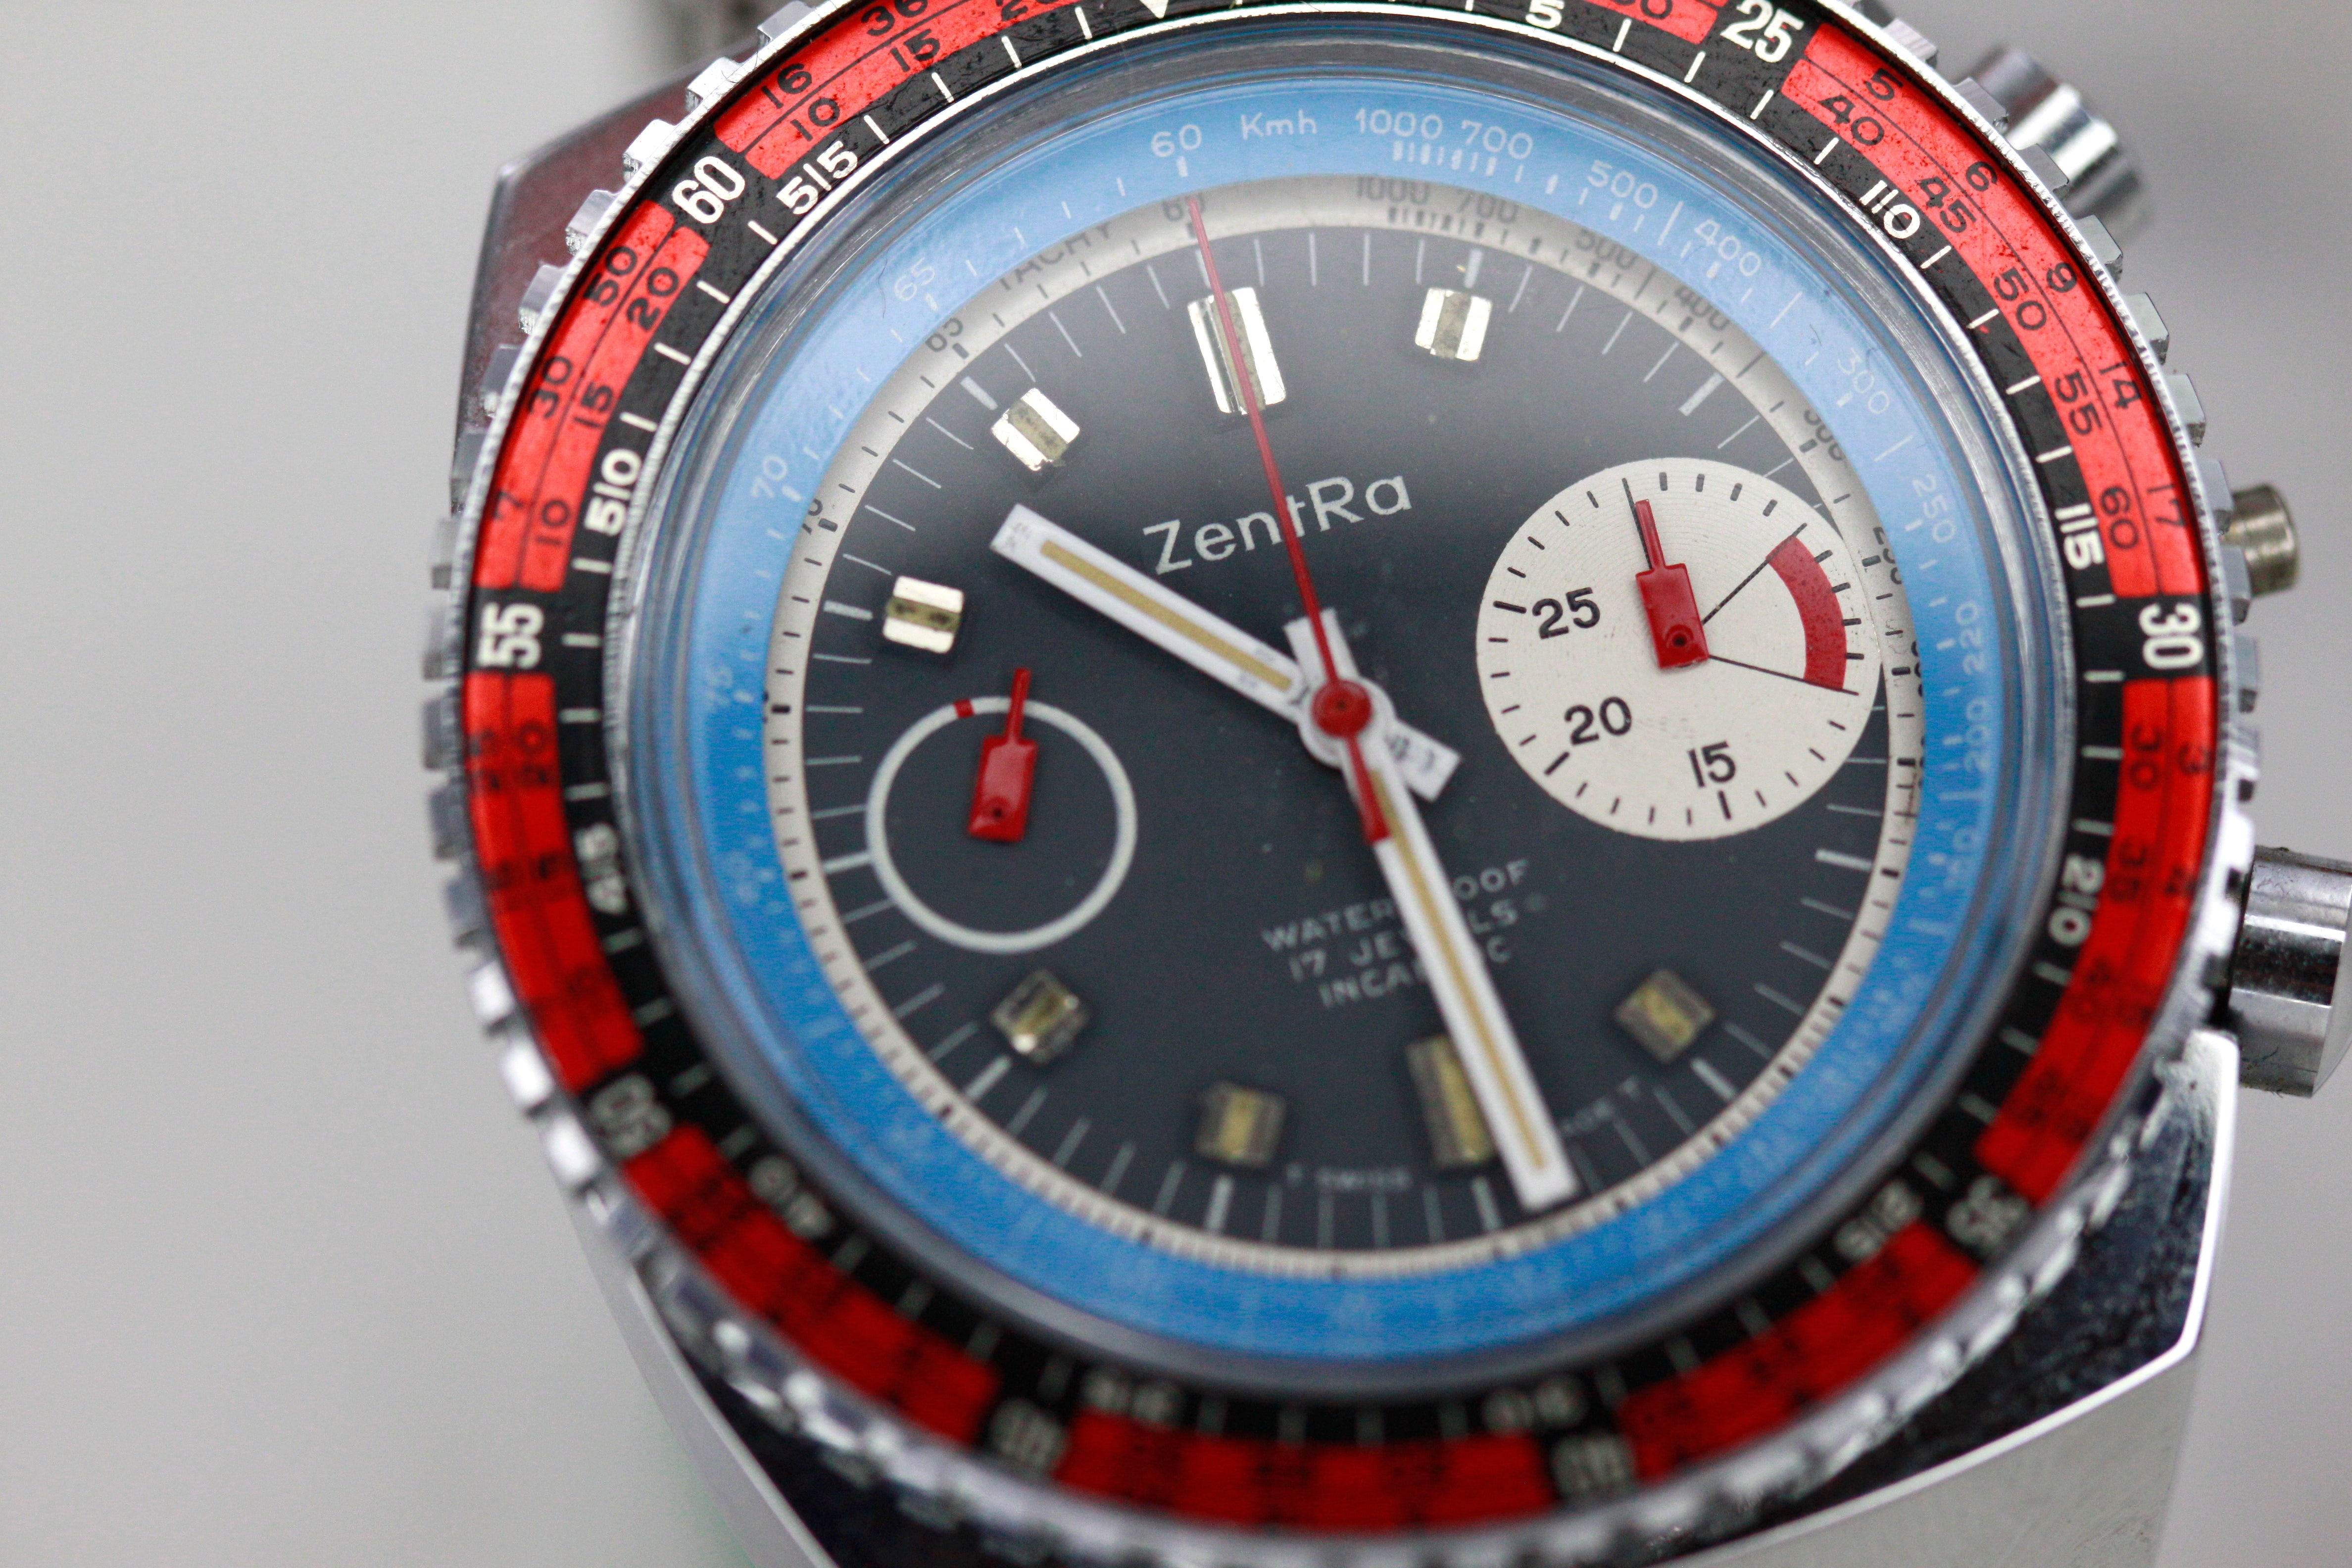 ZENTRA CHRONOGRAPH the watch with a certificate of maturity,the faithful companio